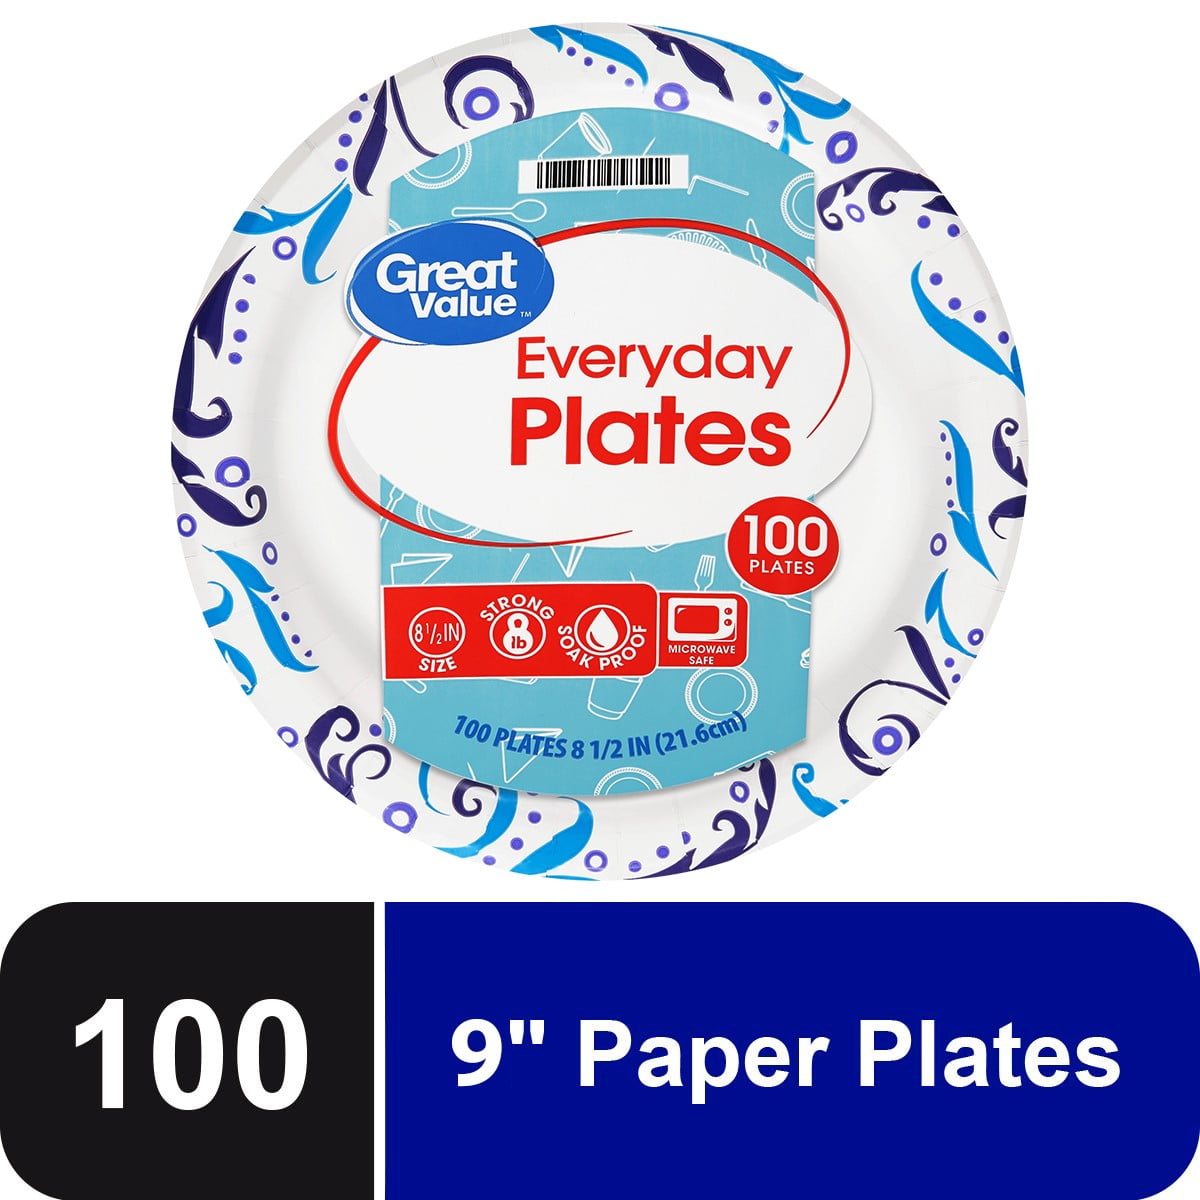 We tested paper plates including Target and Walmart - a non